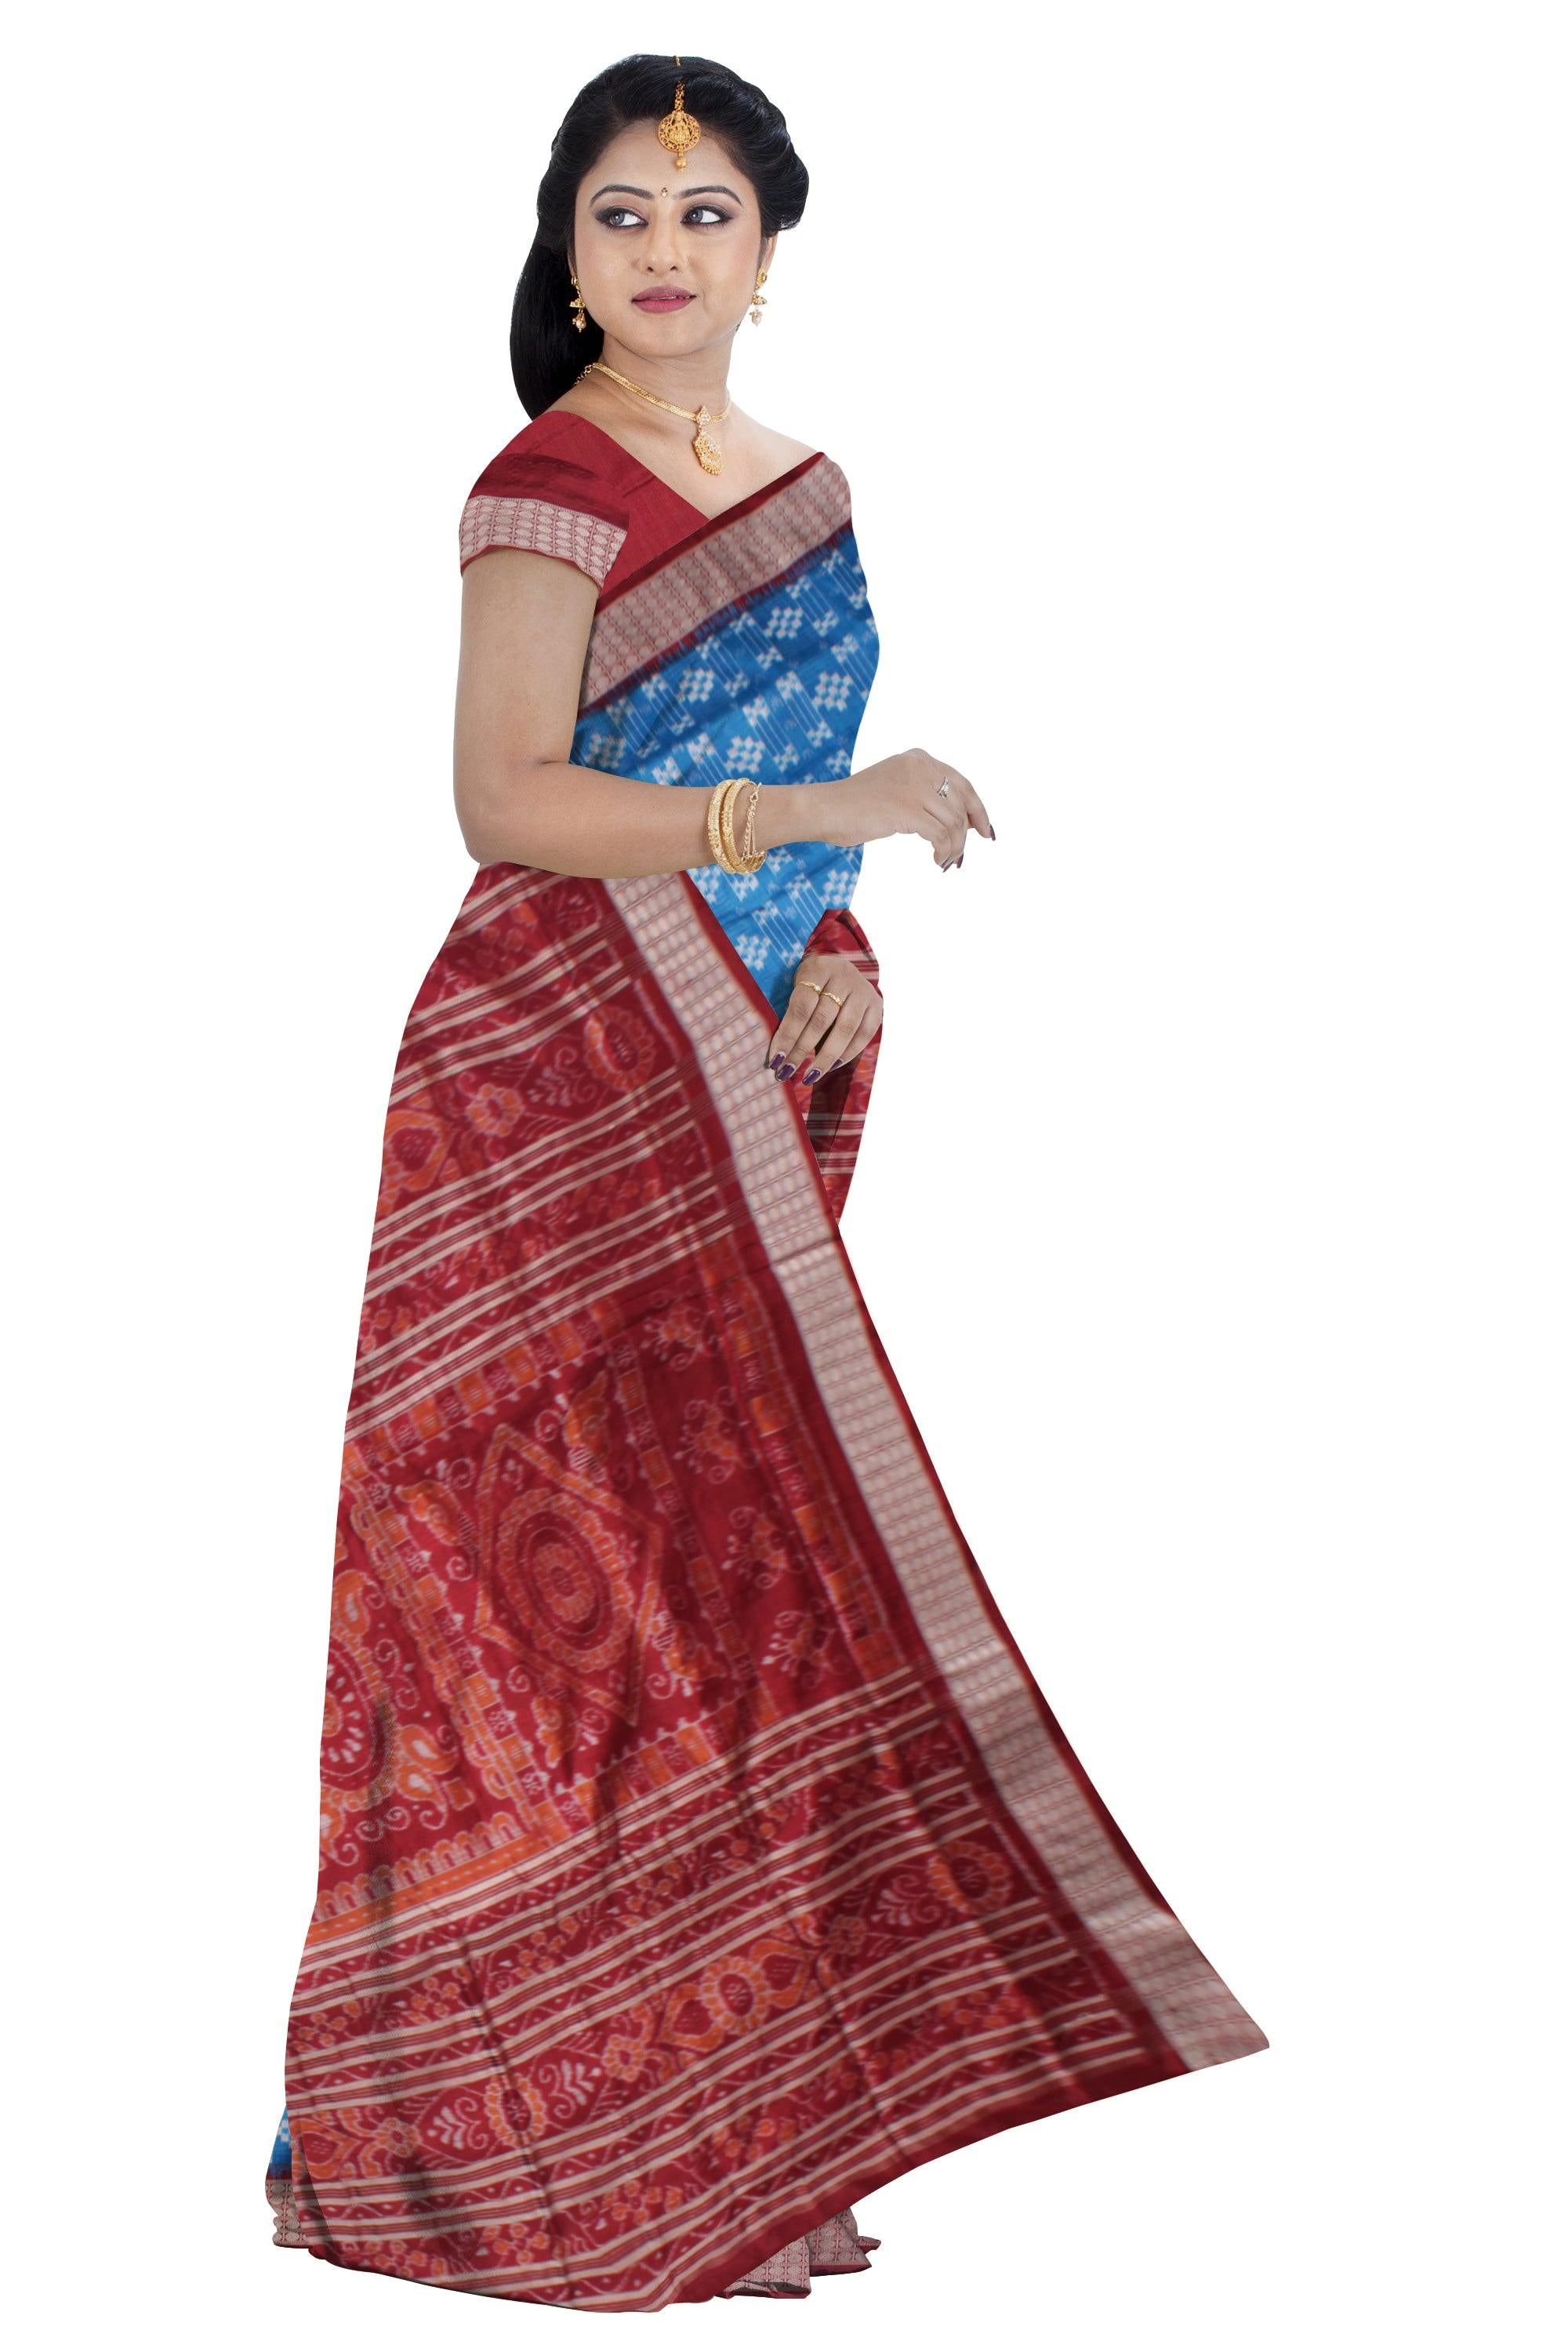 TRADITIONAL PASAPALI PATTERN PURE SILK SAREE IS SKY AND MAROON COLOR BASE, ATTACHED WITH MATCHING BLOUSE PIECE. - Koshali Arts & Crafts Enterprise